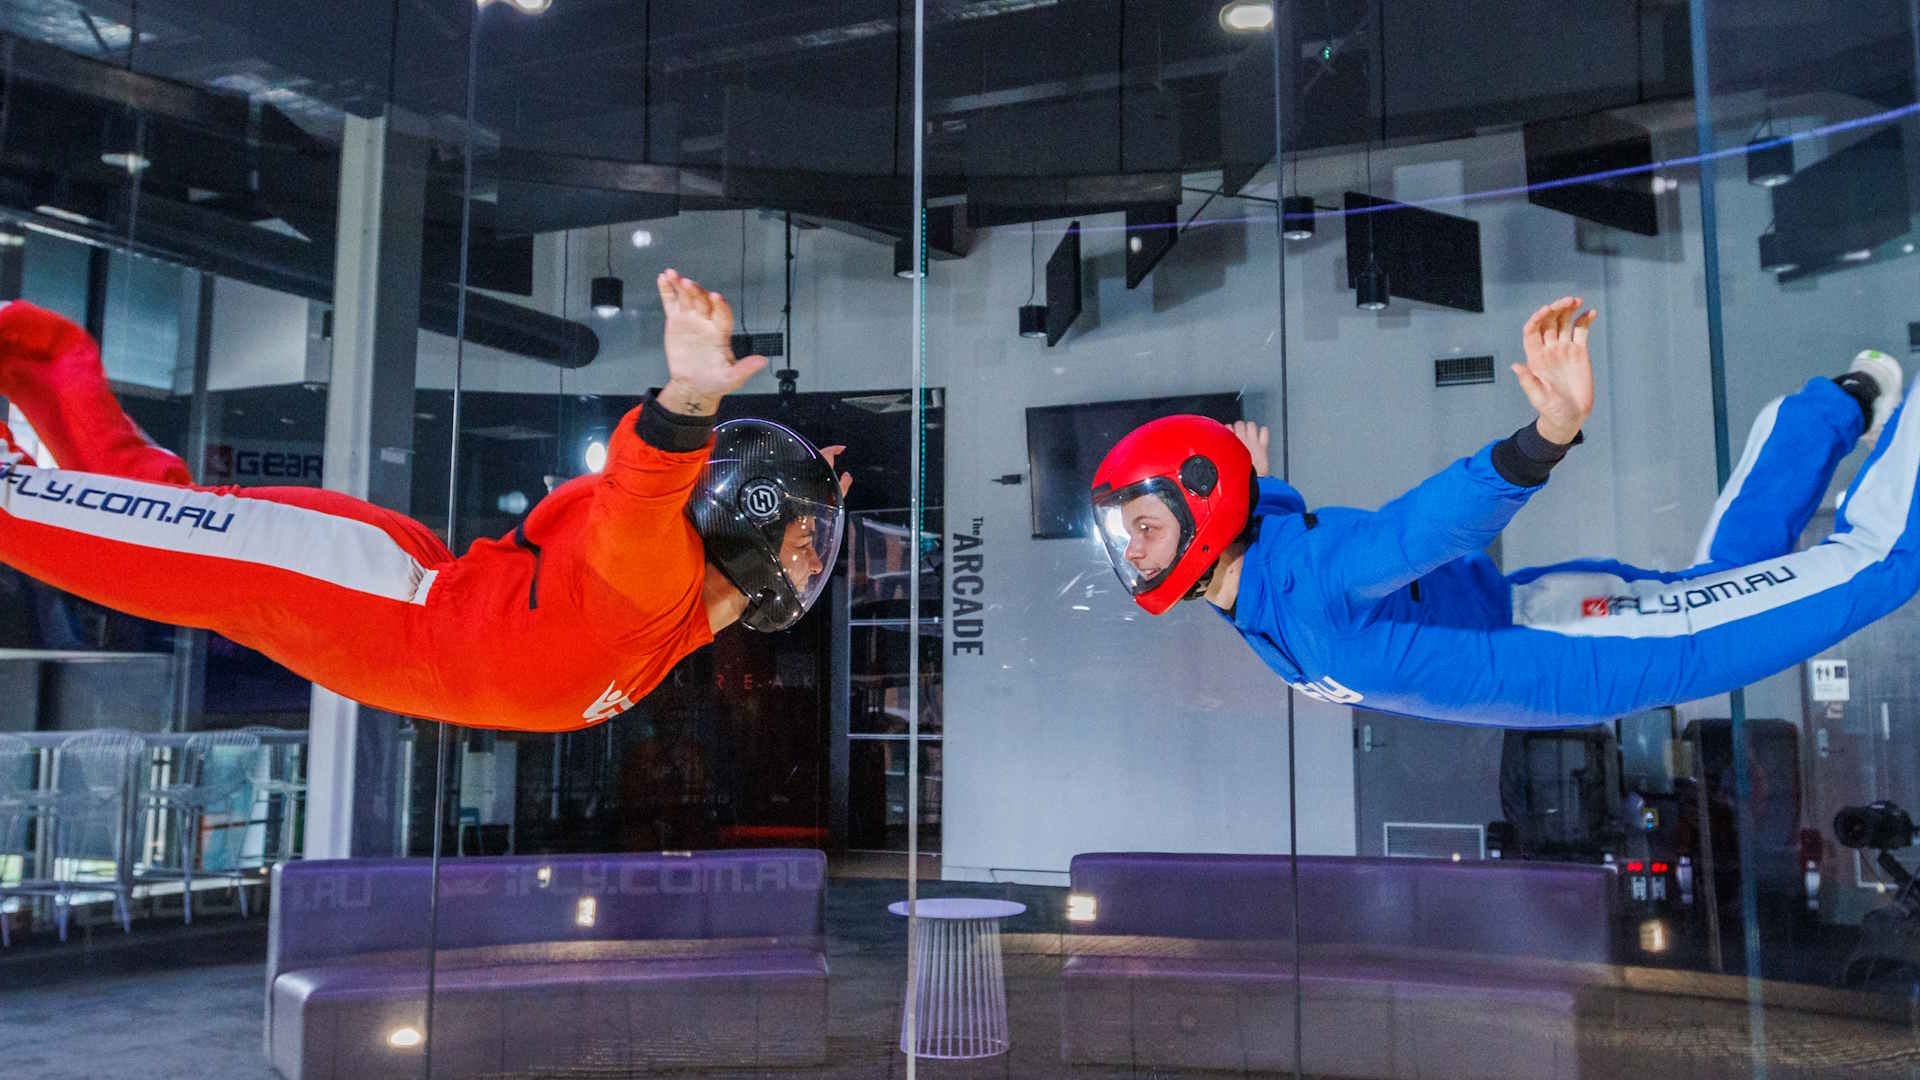 Two flyers in orange and blue jumpsuits flying and looking at each other